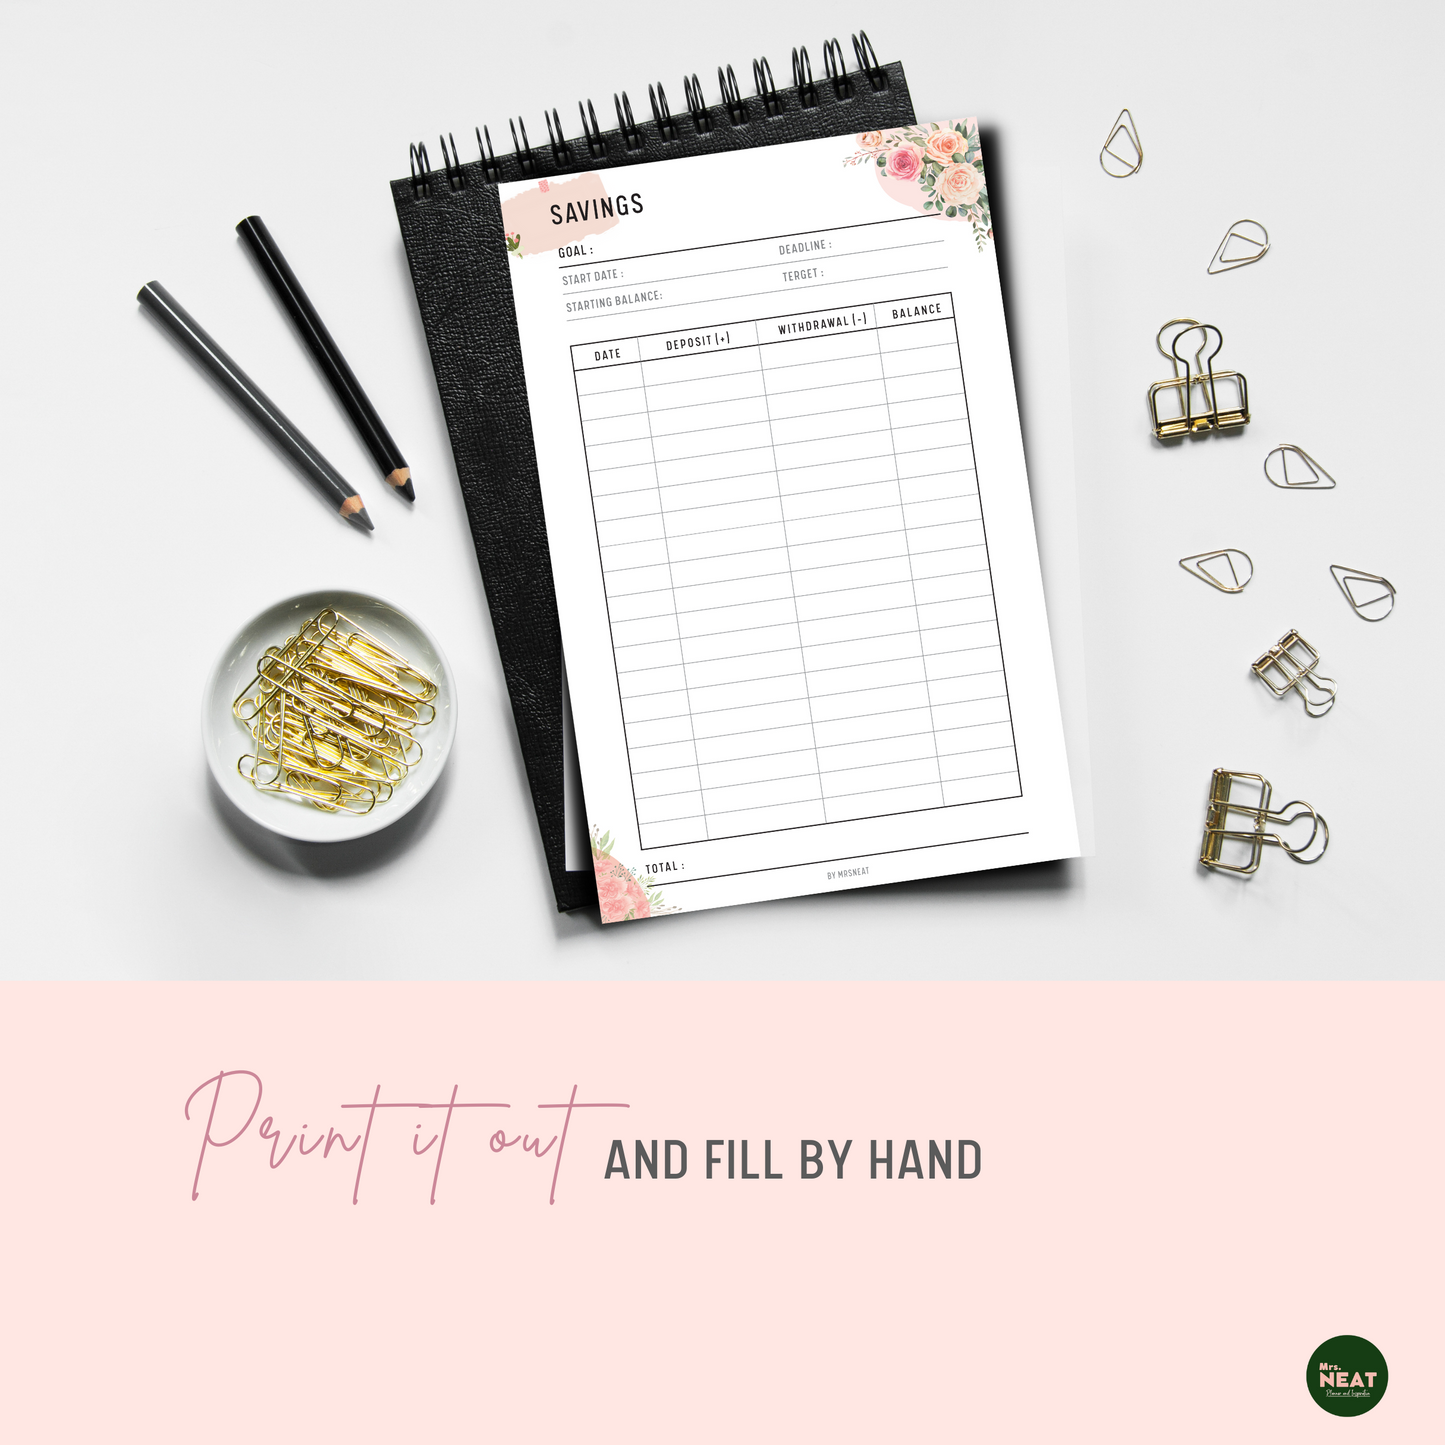 Cute Pink Floral Saving Tracker printed out and put on the black book with stationery surround